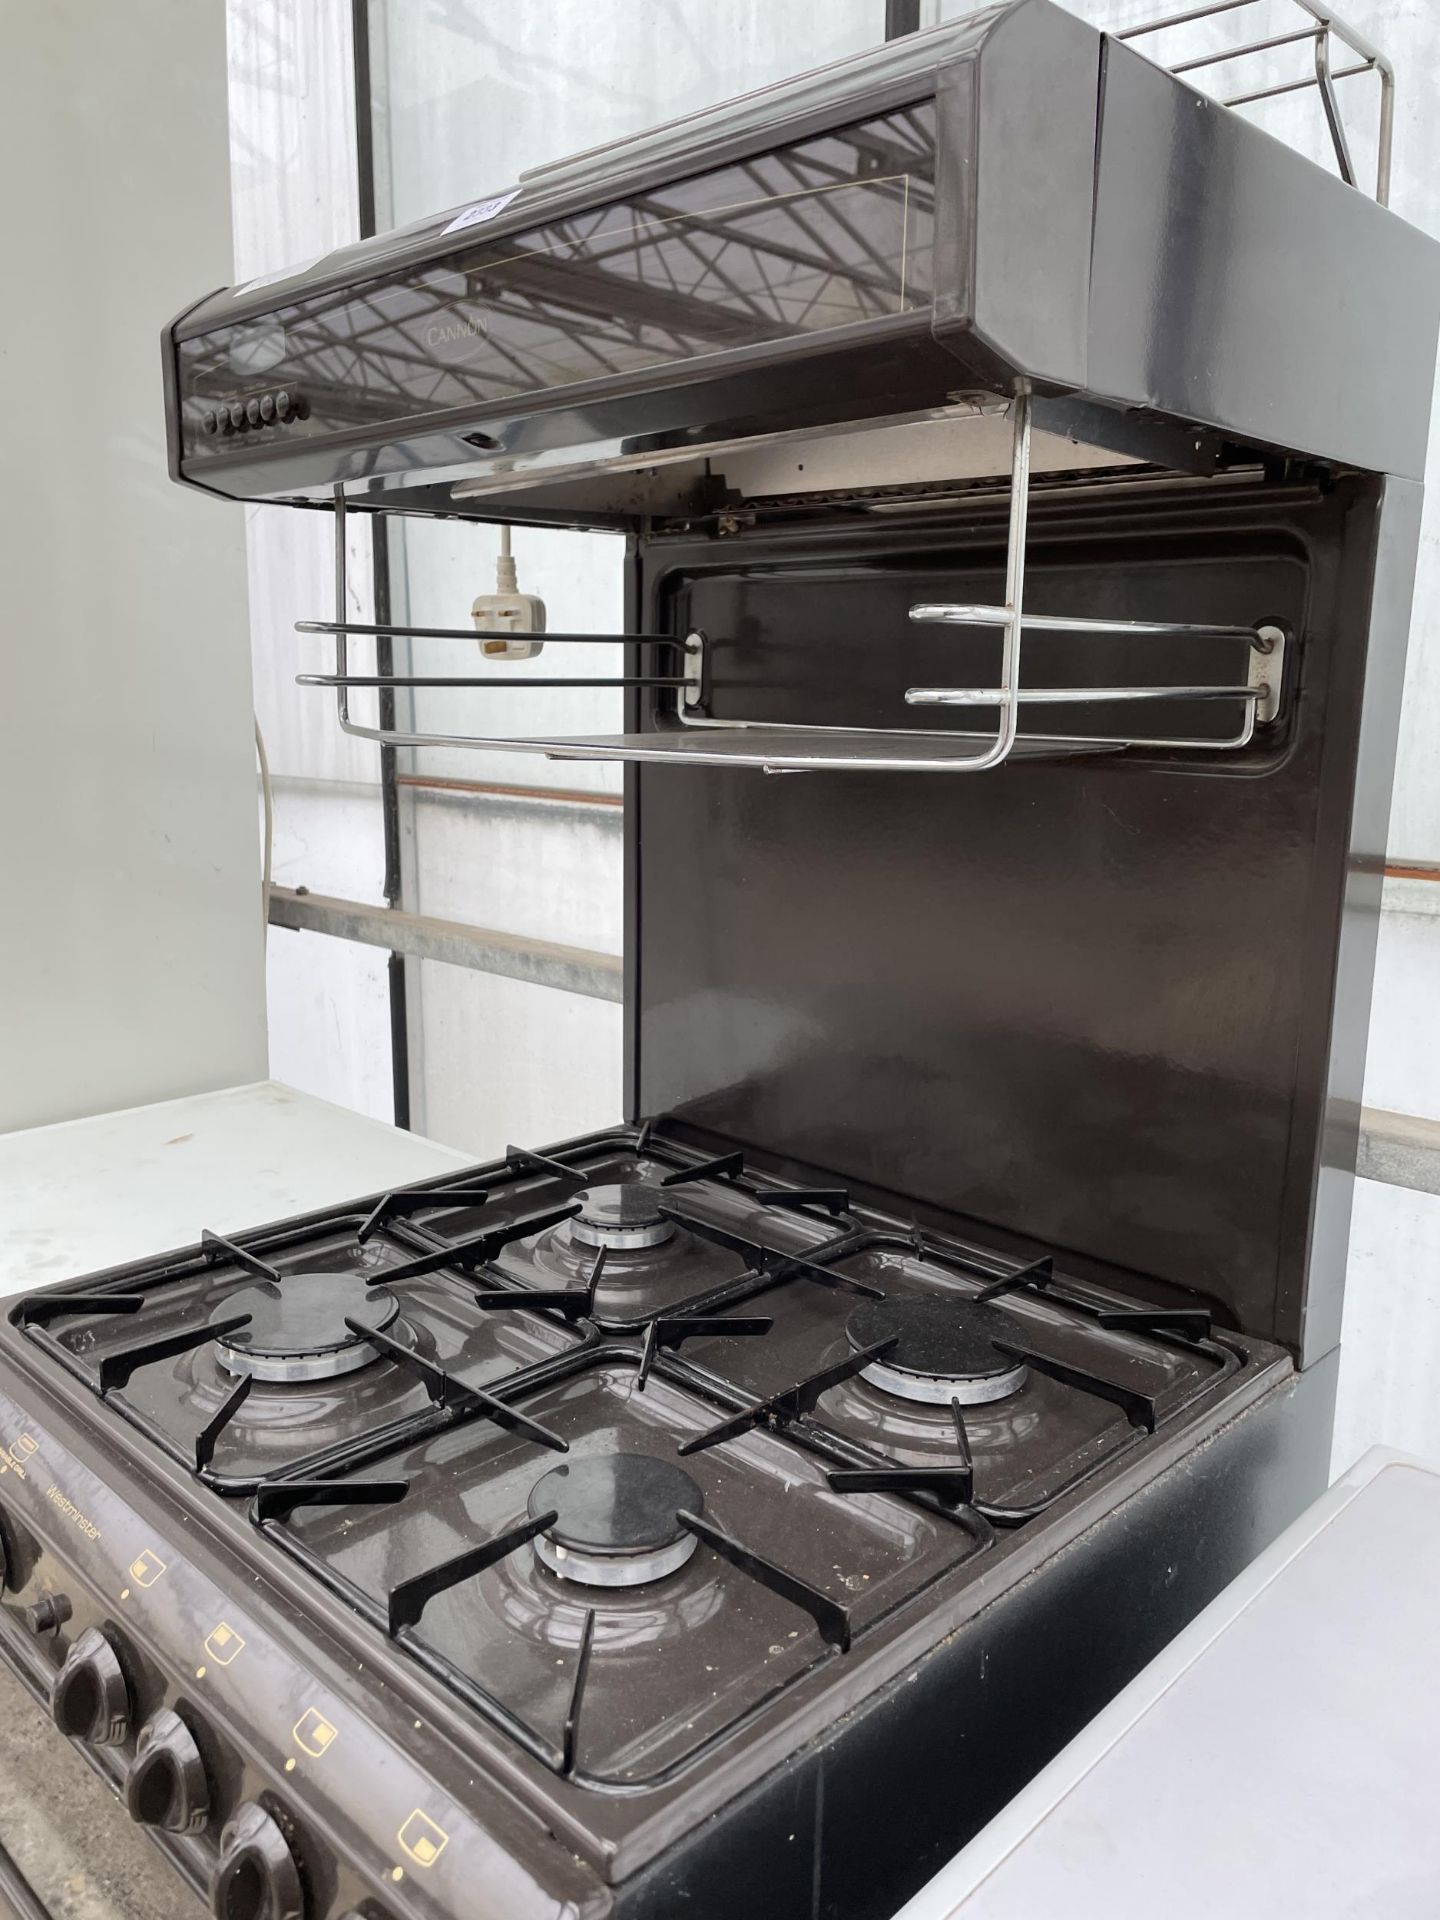 A BLACK CANON FREESTANDING OVEN AND HOB - Image 4 of 5